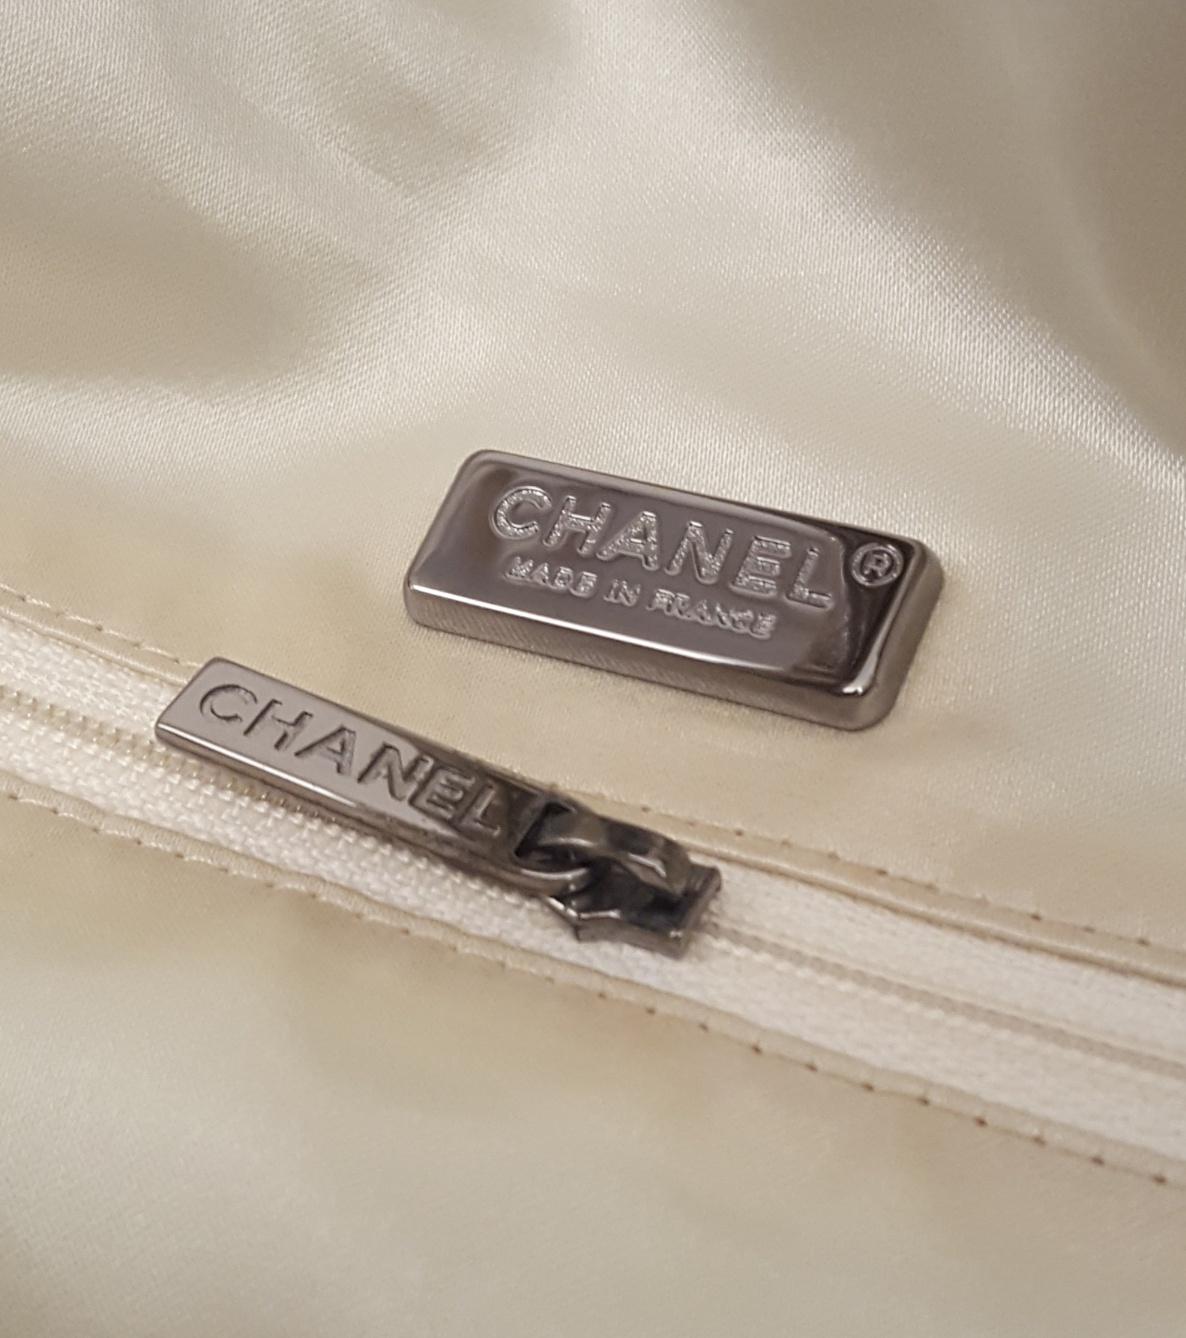 Chanel Champagne Color  Metallic Lame Mini Hobo Bag with Two Flaps for Closure 2